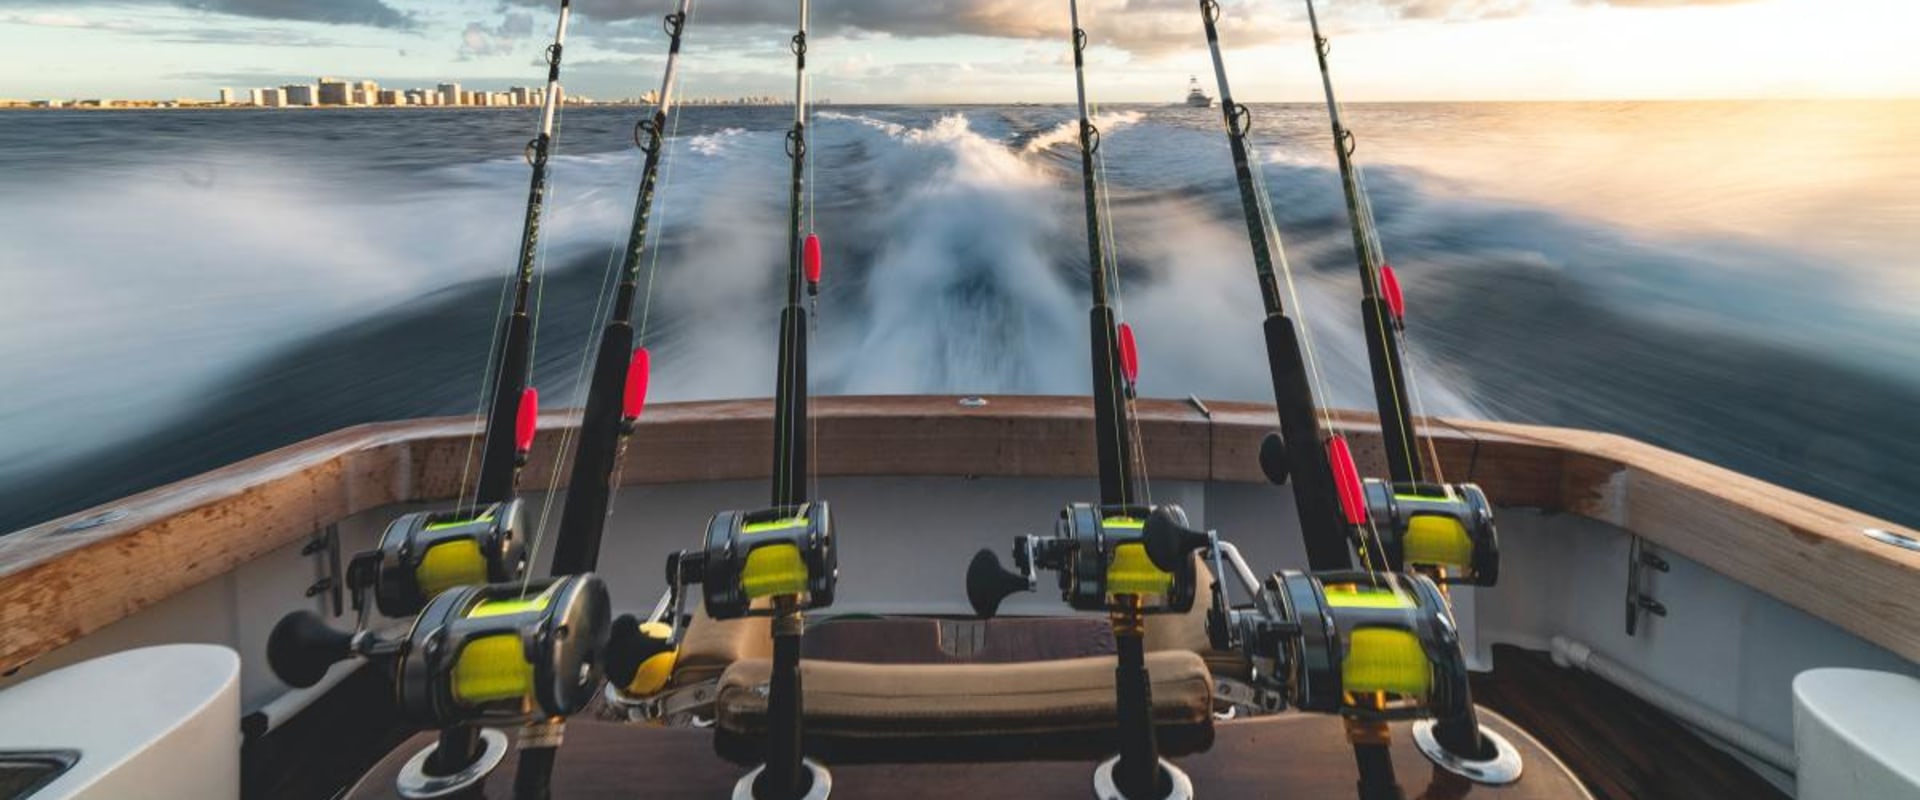 How much do you tip on fishing charter?